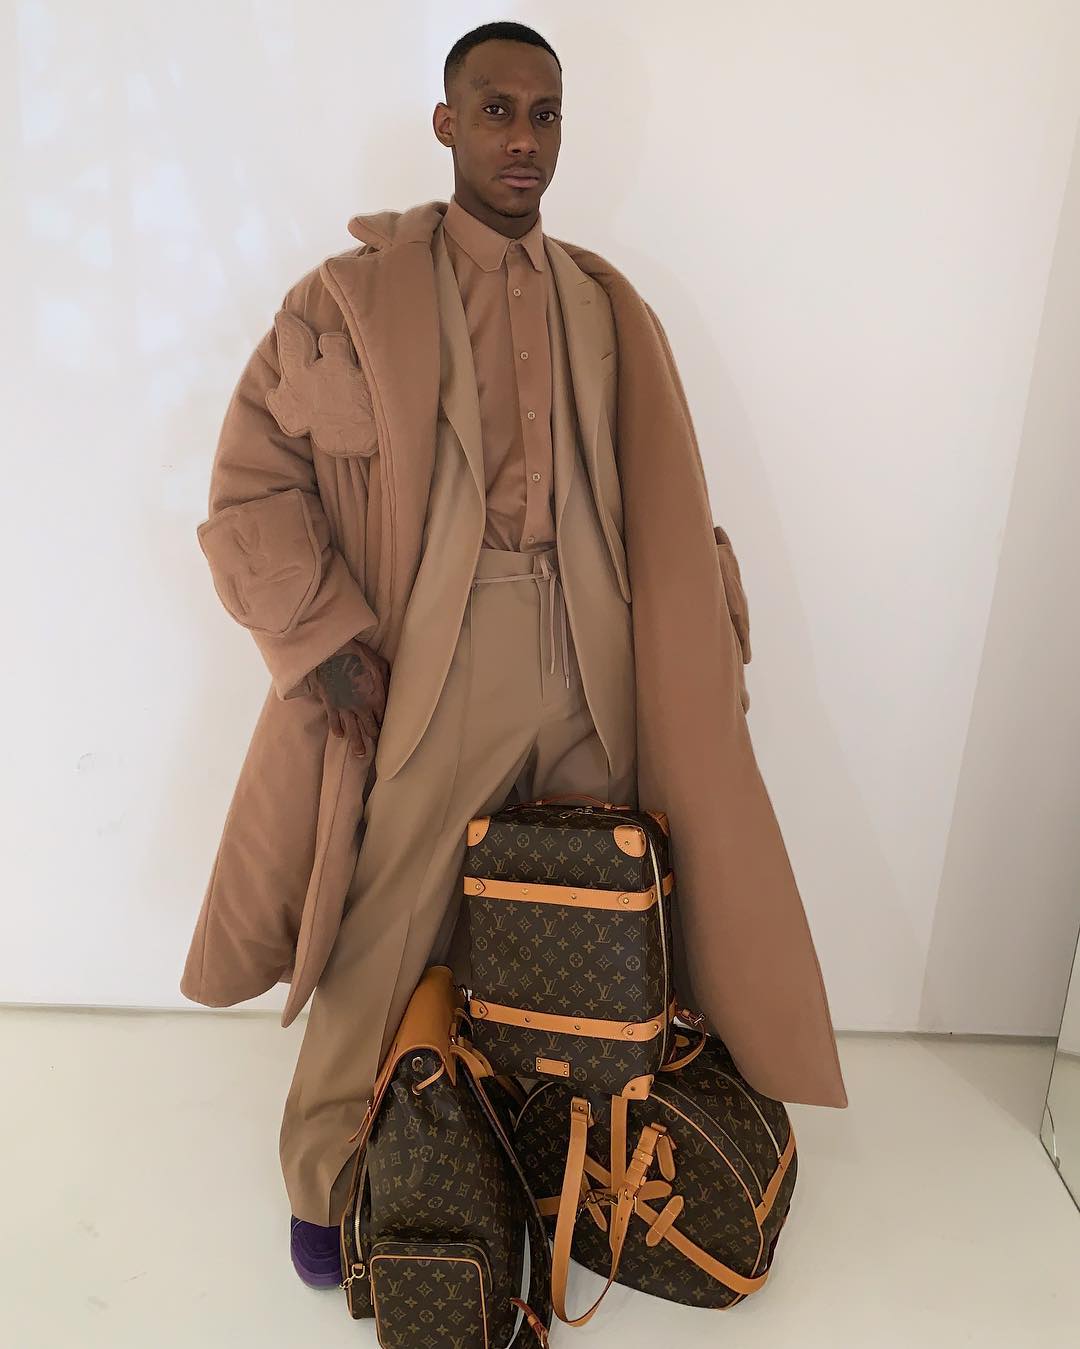 SPOTTED: Octavian Draped in Virgil Abloh’s Louis Vuitton Wares